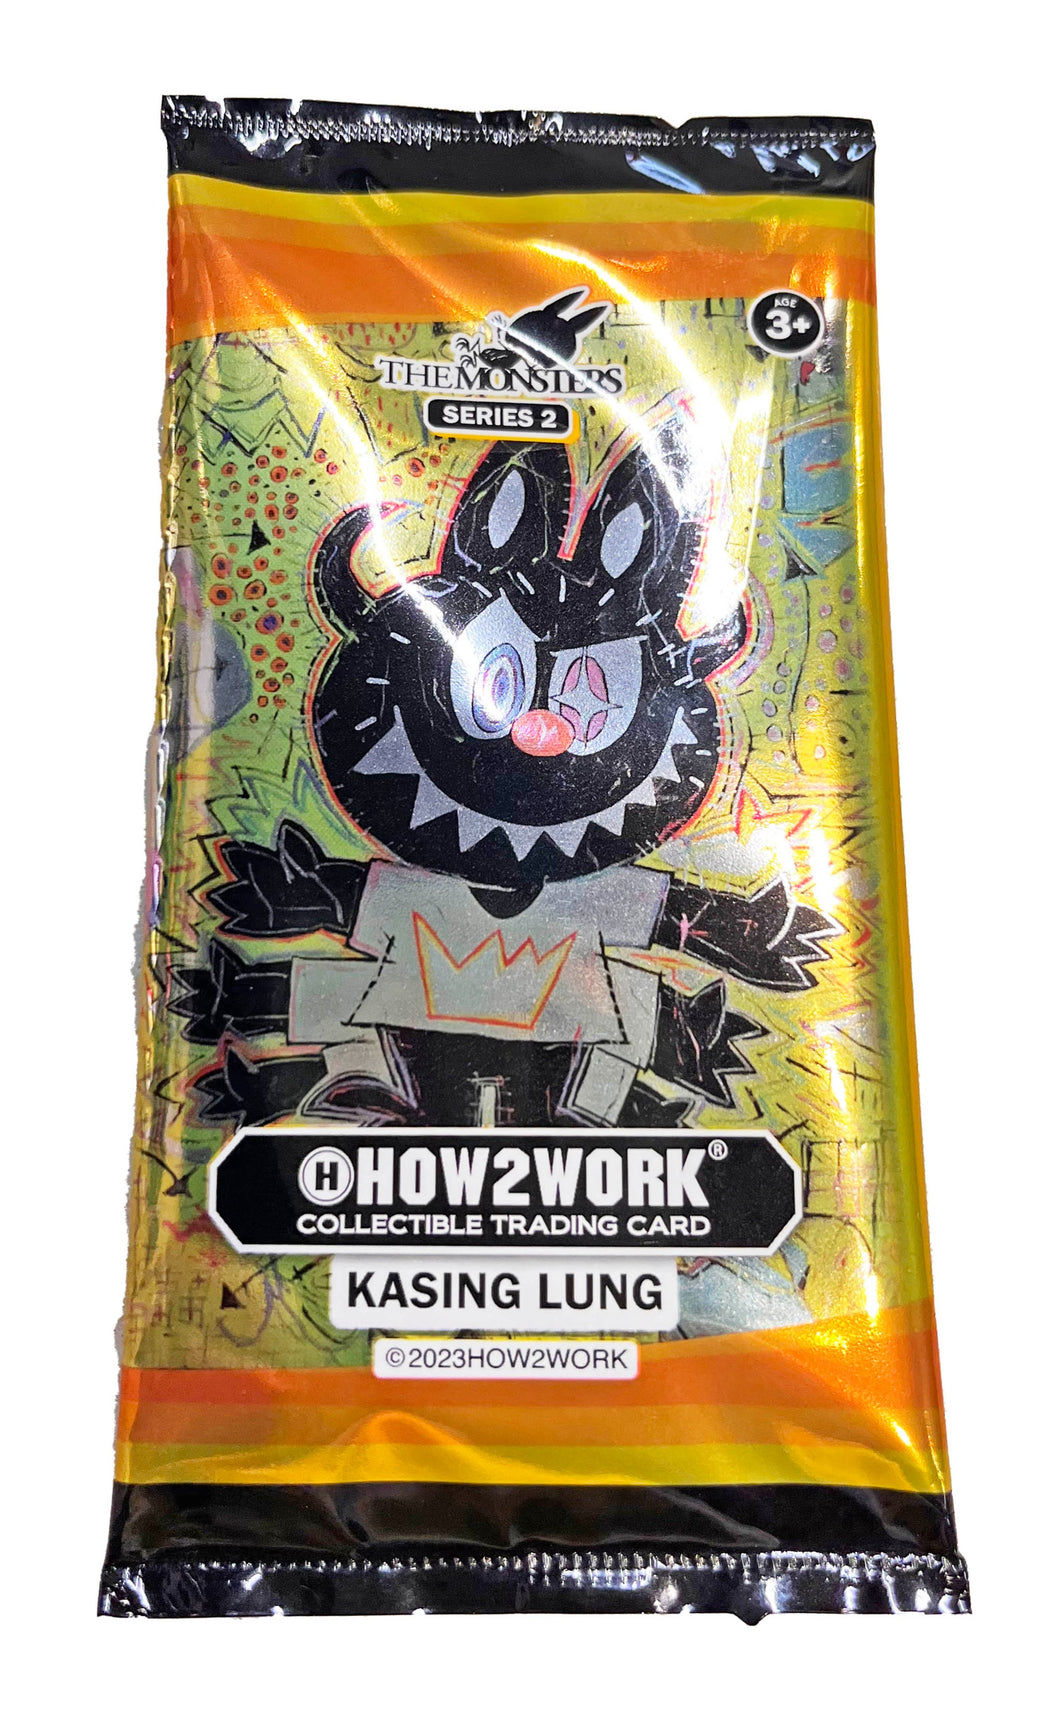 How2work Kasing Lung Collectible Trading Cards (SINGLE PACK)